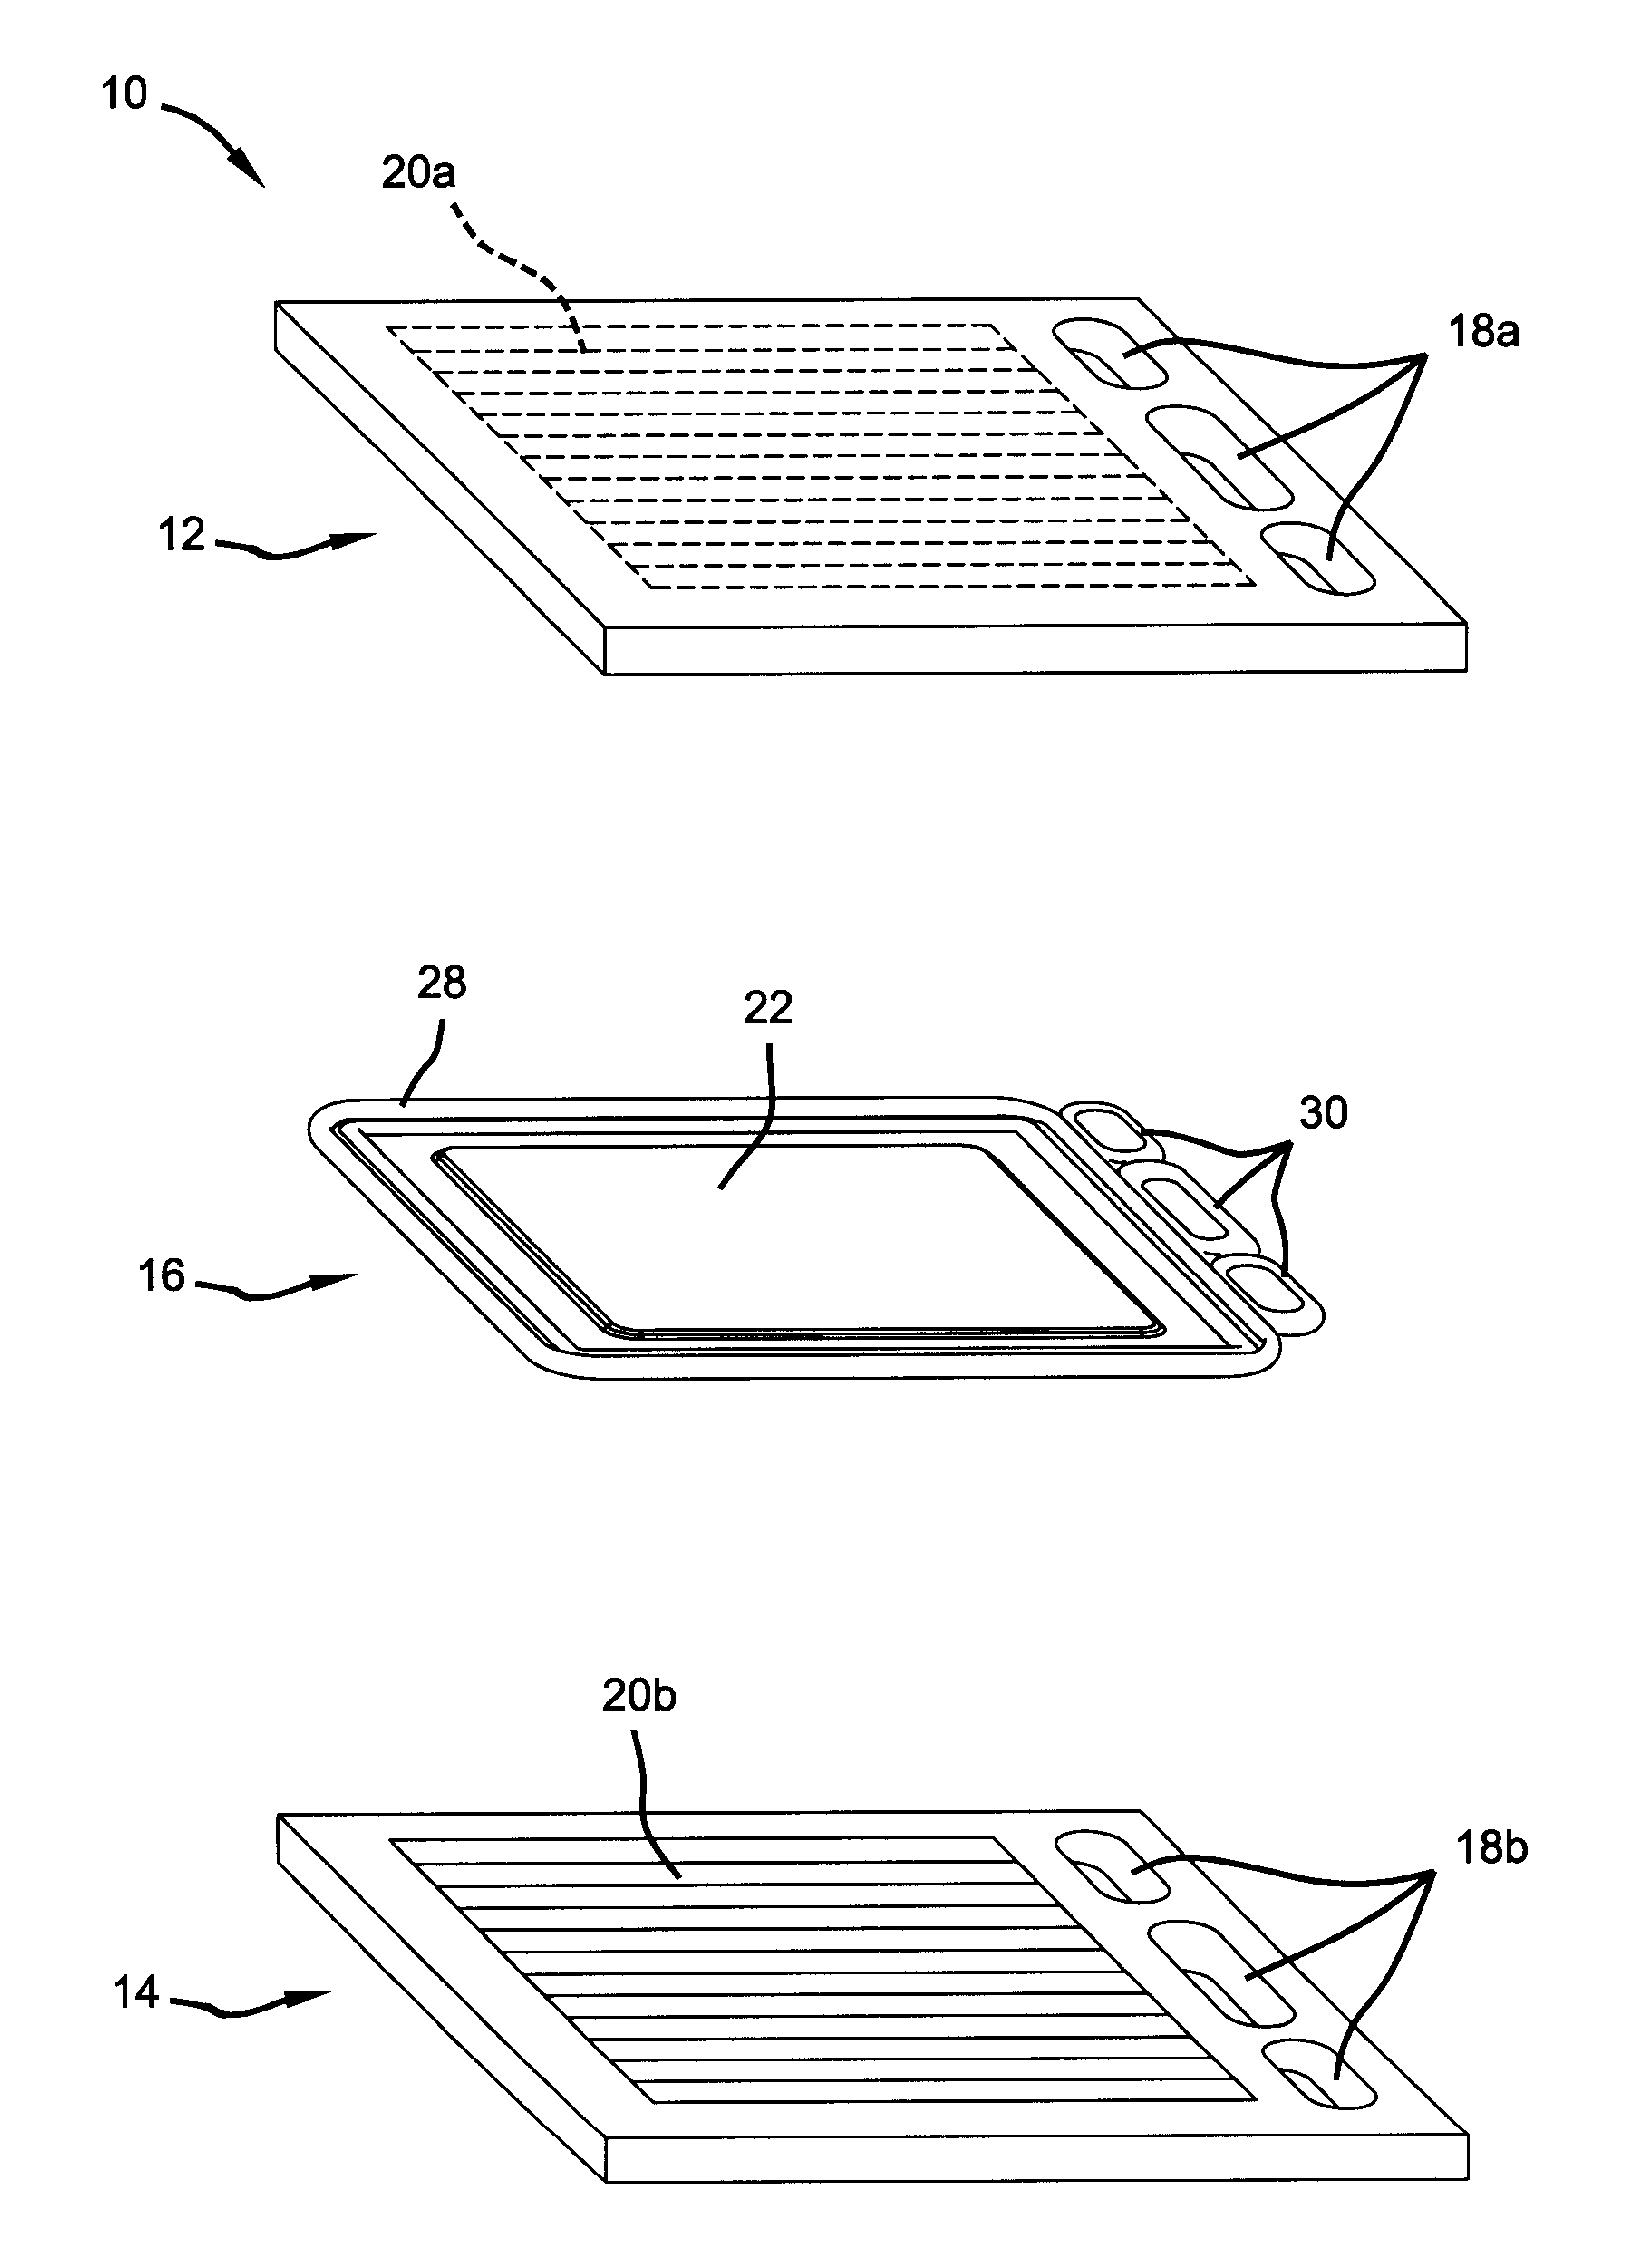 Integrally molded gasket for a fuel cell assembly